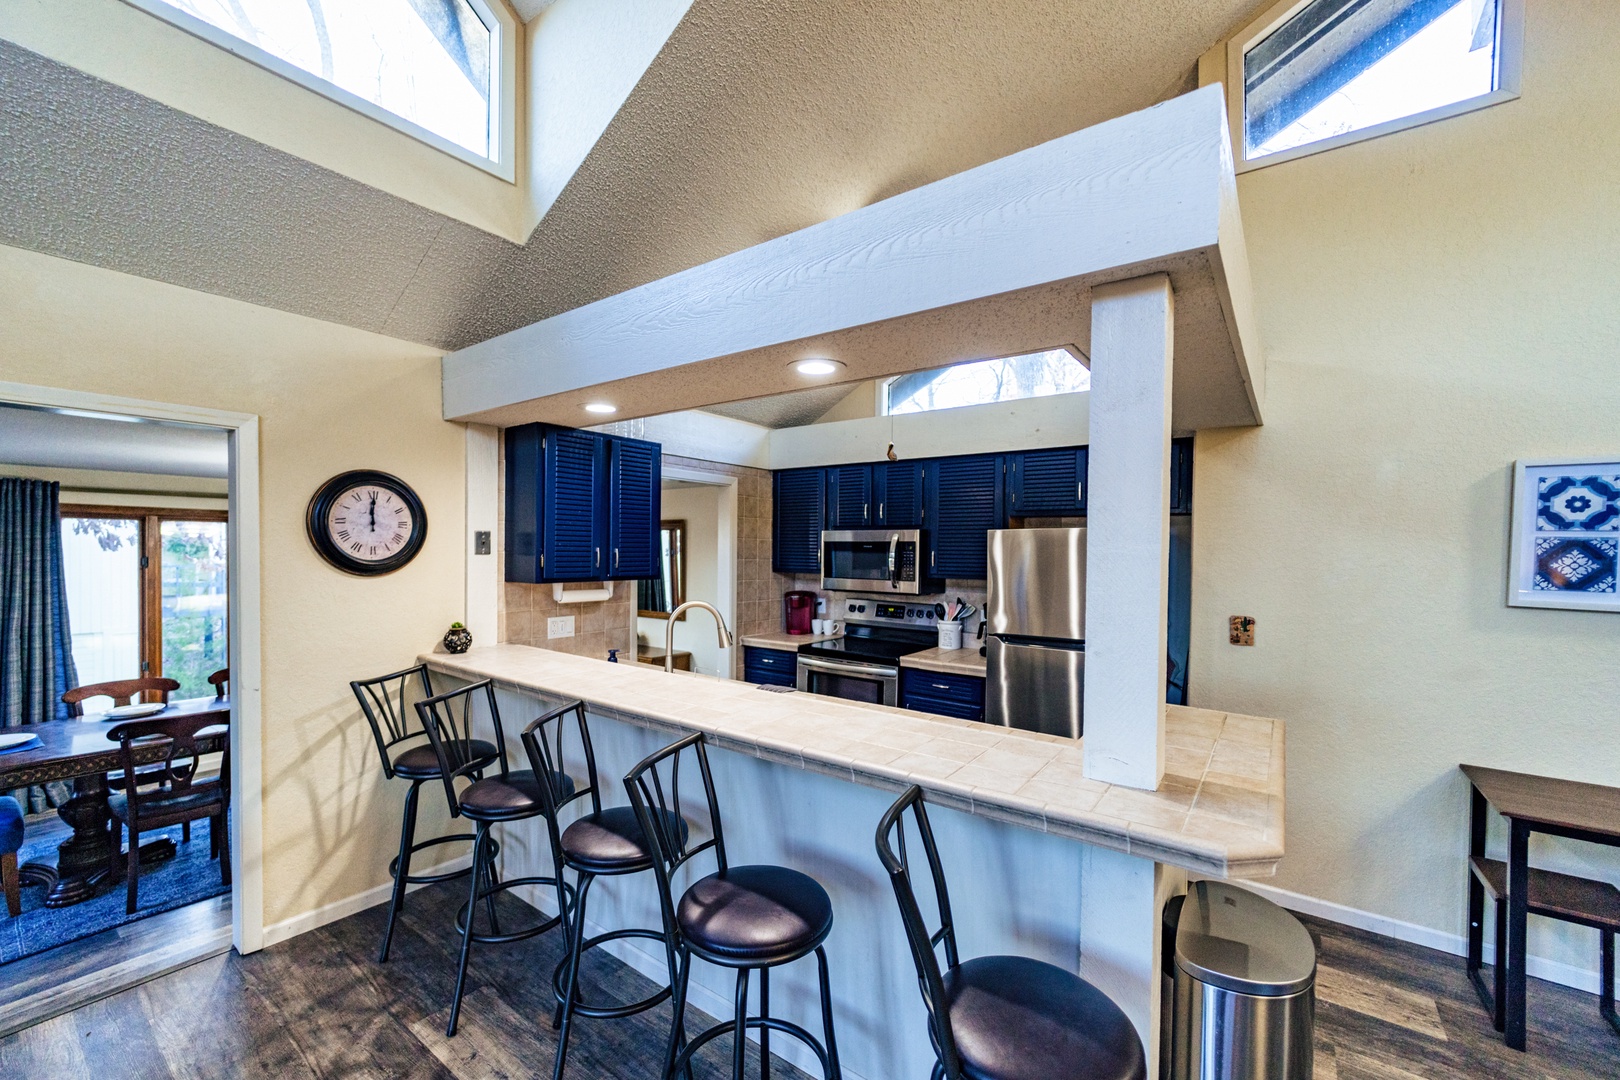 Sip morning coffee or grab a bite at the kitchen counter, with seating for 5